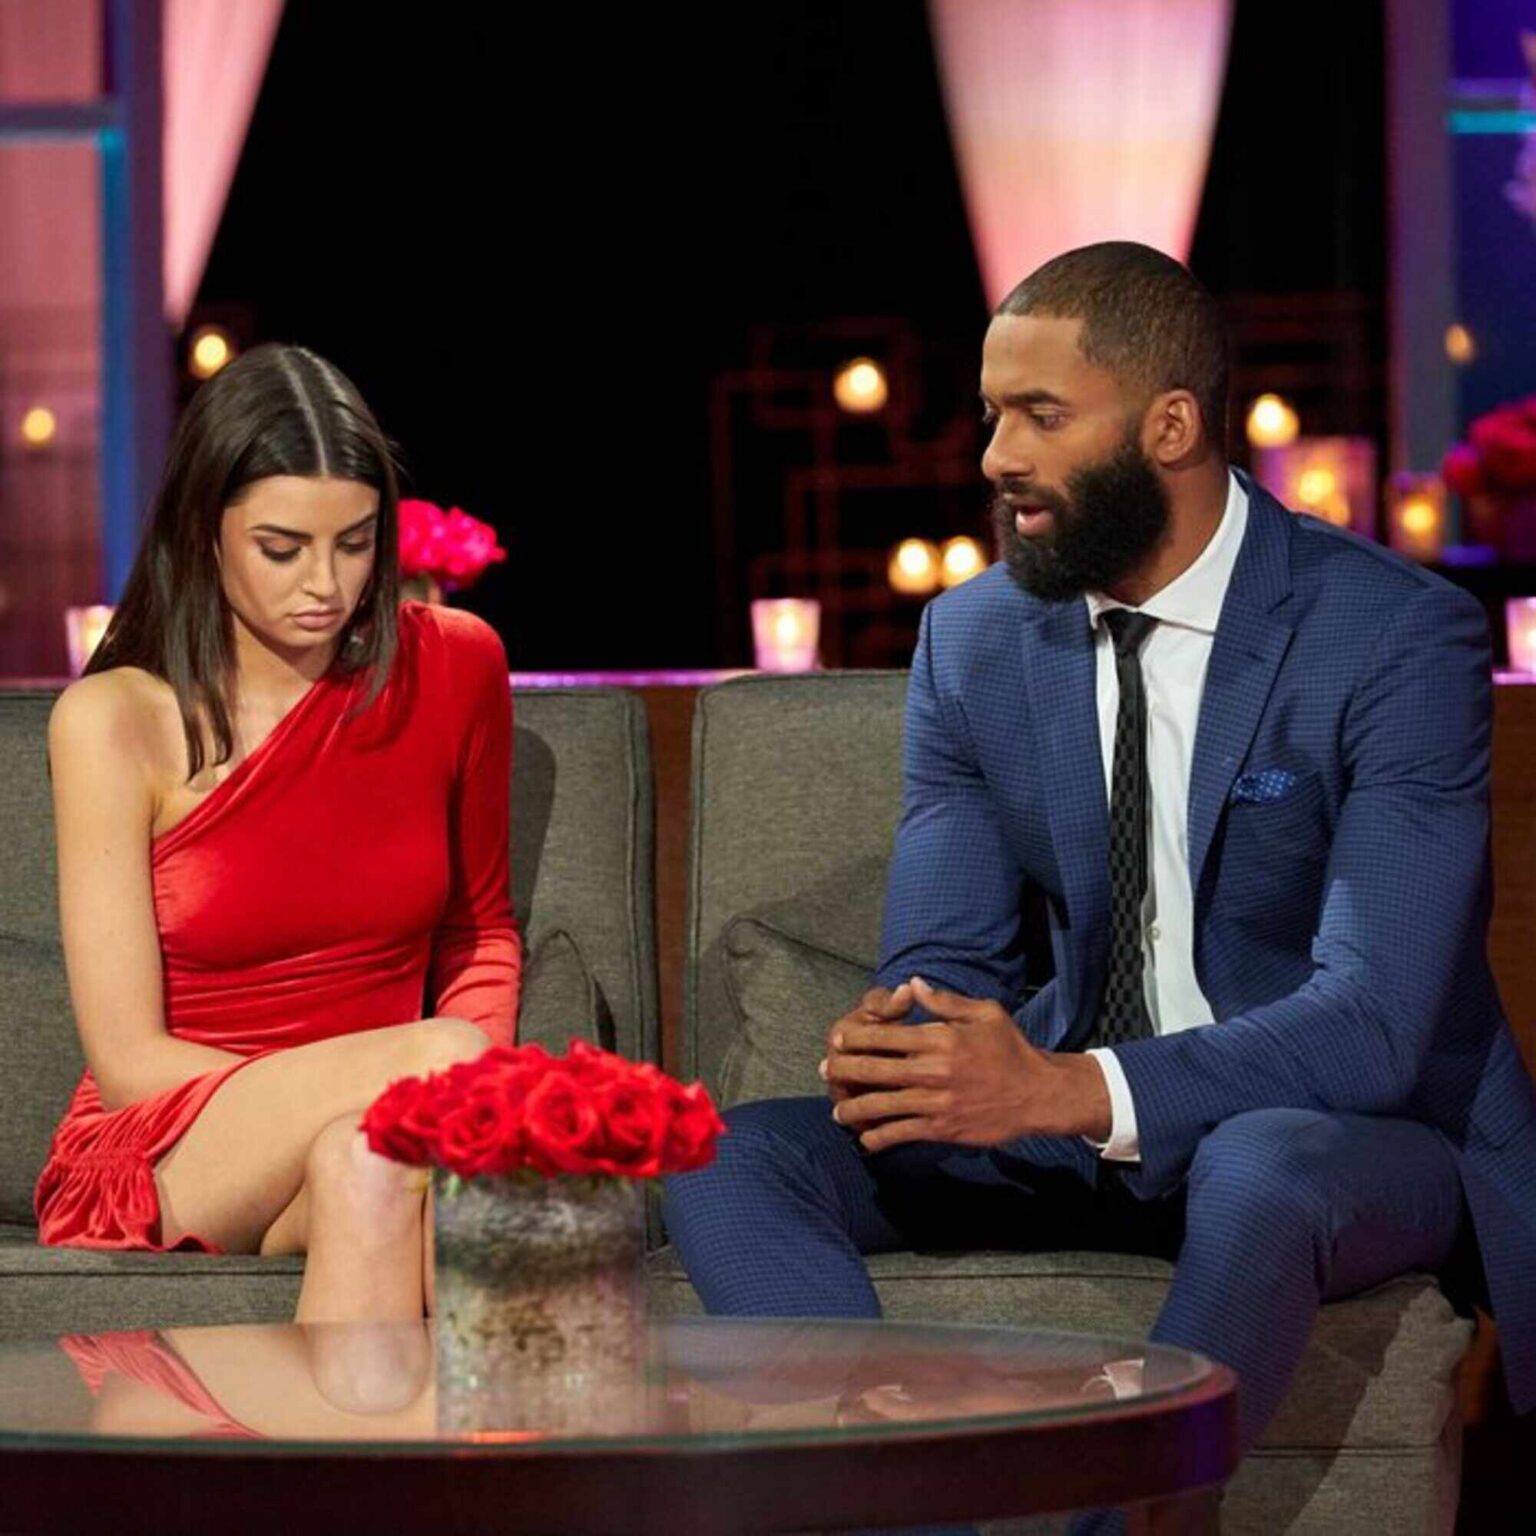 Among all this controversy, could this finally be the end of 'The Bachelor' on ABC? Read all about what Rachel Lindsay has to say on the situation here.